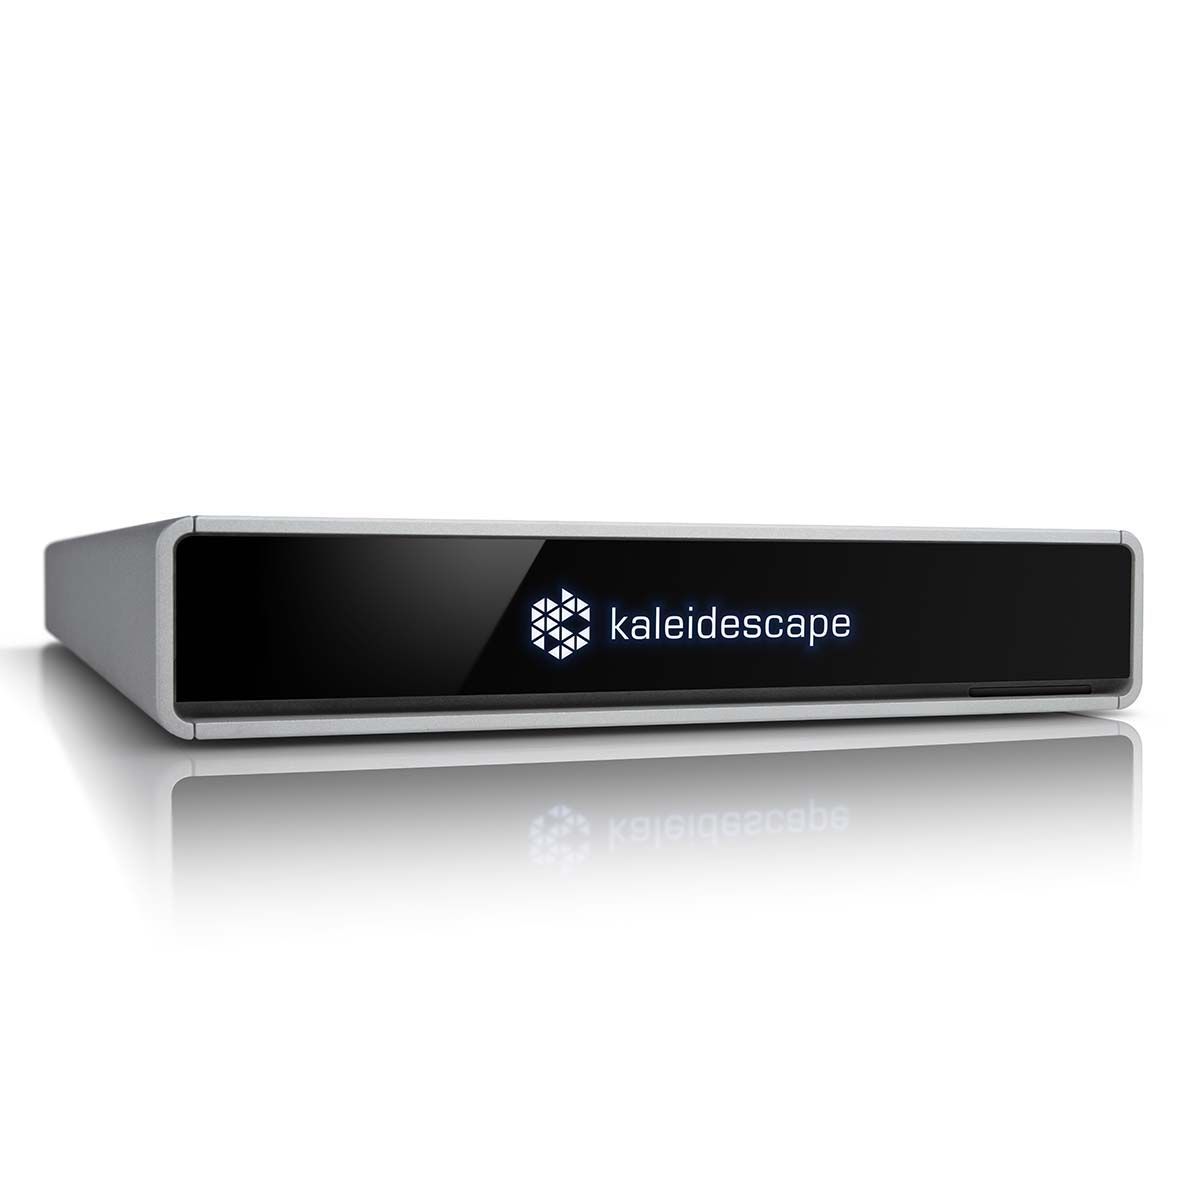 Kaleidescape Compact Terra Movie Server 12TB Storage For Home Theaters | Stores 200 4K UHD Movies - KSCAPE-K0110-0012